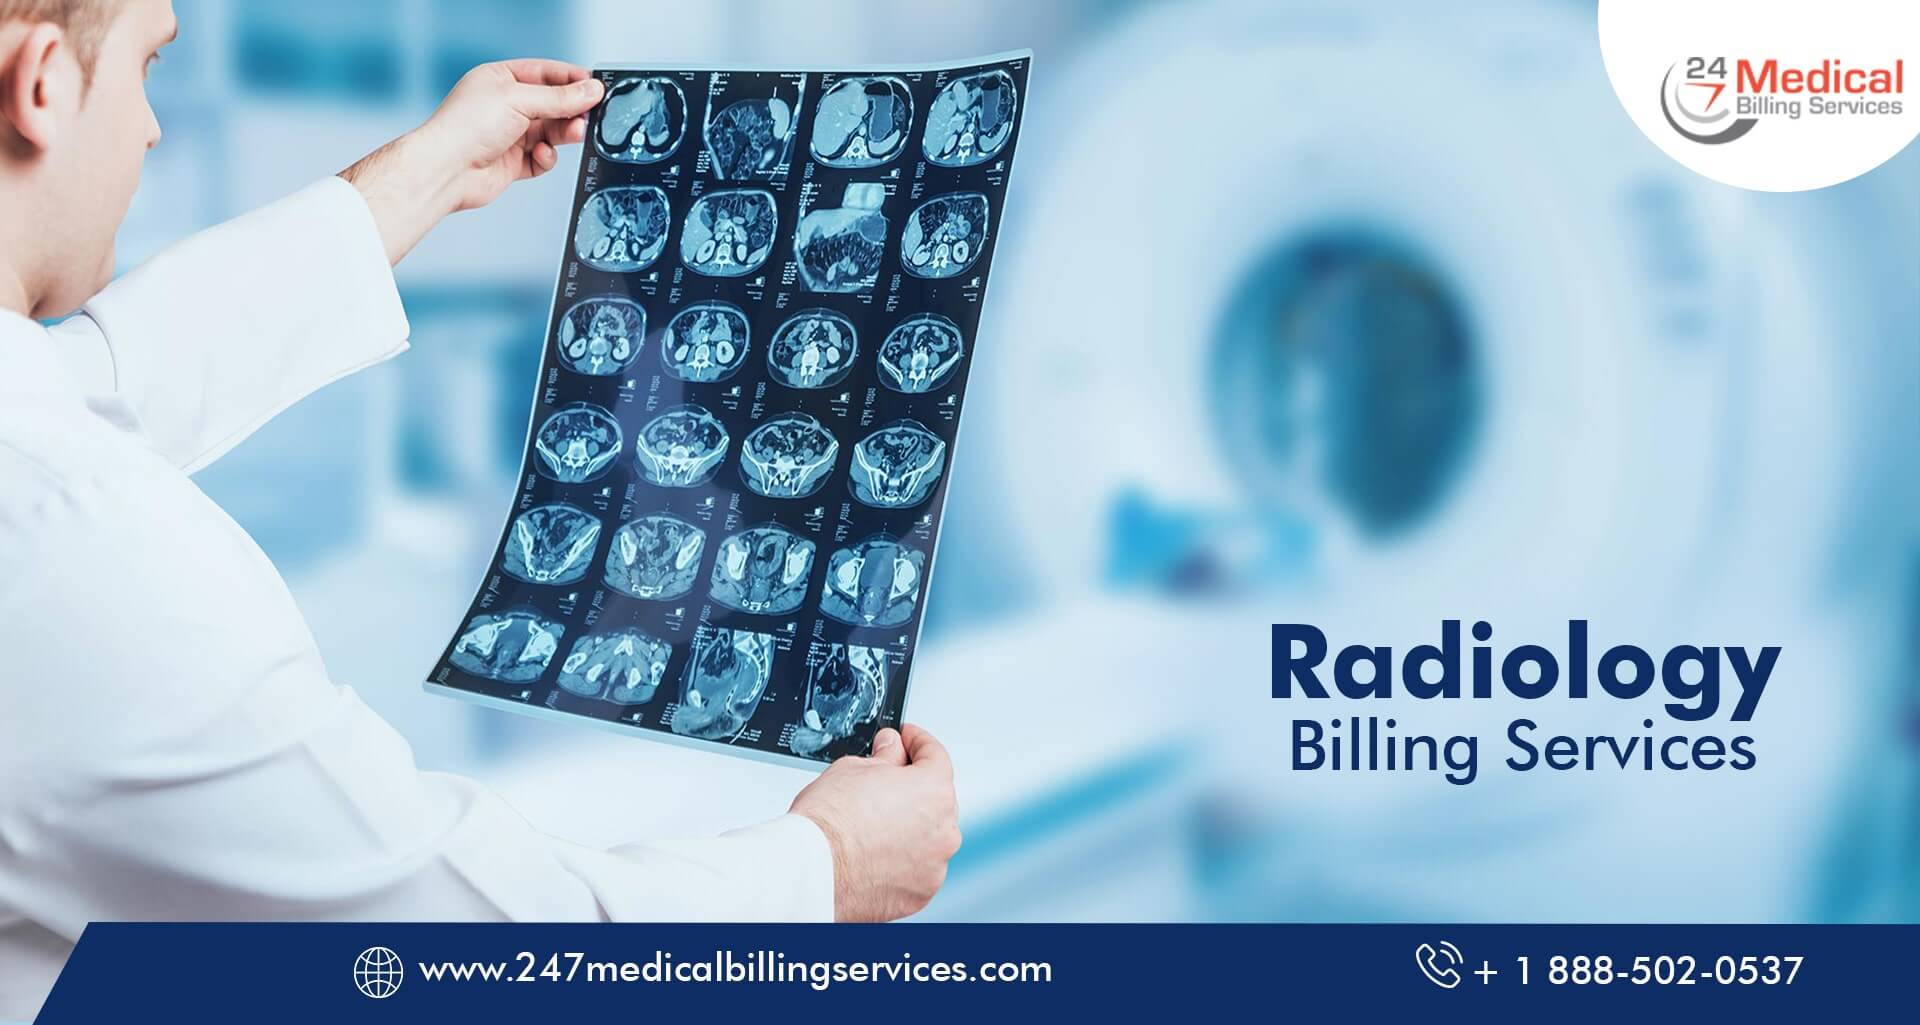  Radiology Billing Services in Plano, Texas (TX)